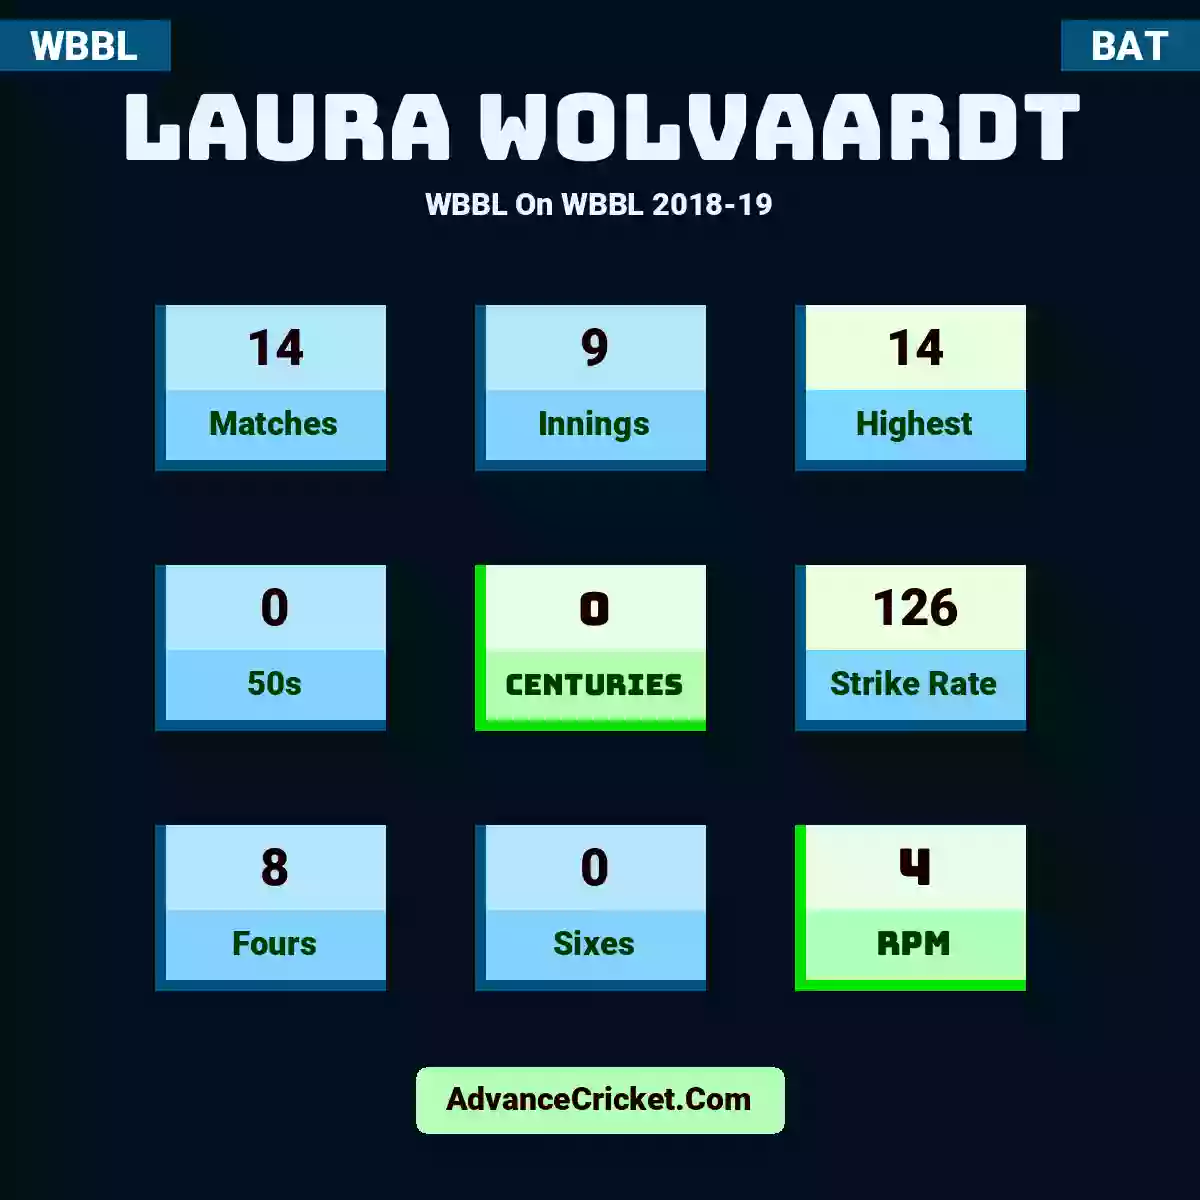 Laura Wolvaardt WBBL  On WBBL 2018-19, Laura Wolvaardt played 14 matches, scored 14 runs as highest, 0 half-centuries, and 0 centuries, with a strike rate of 126. L.Wolvaardt hit 8 fours and 0 sixes, with an RPM of 4.